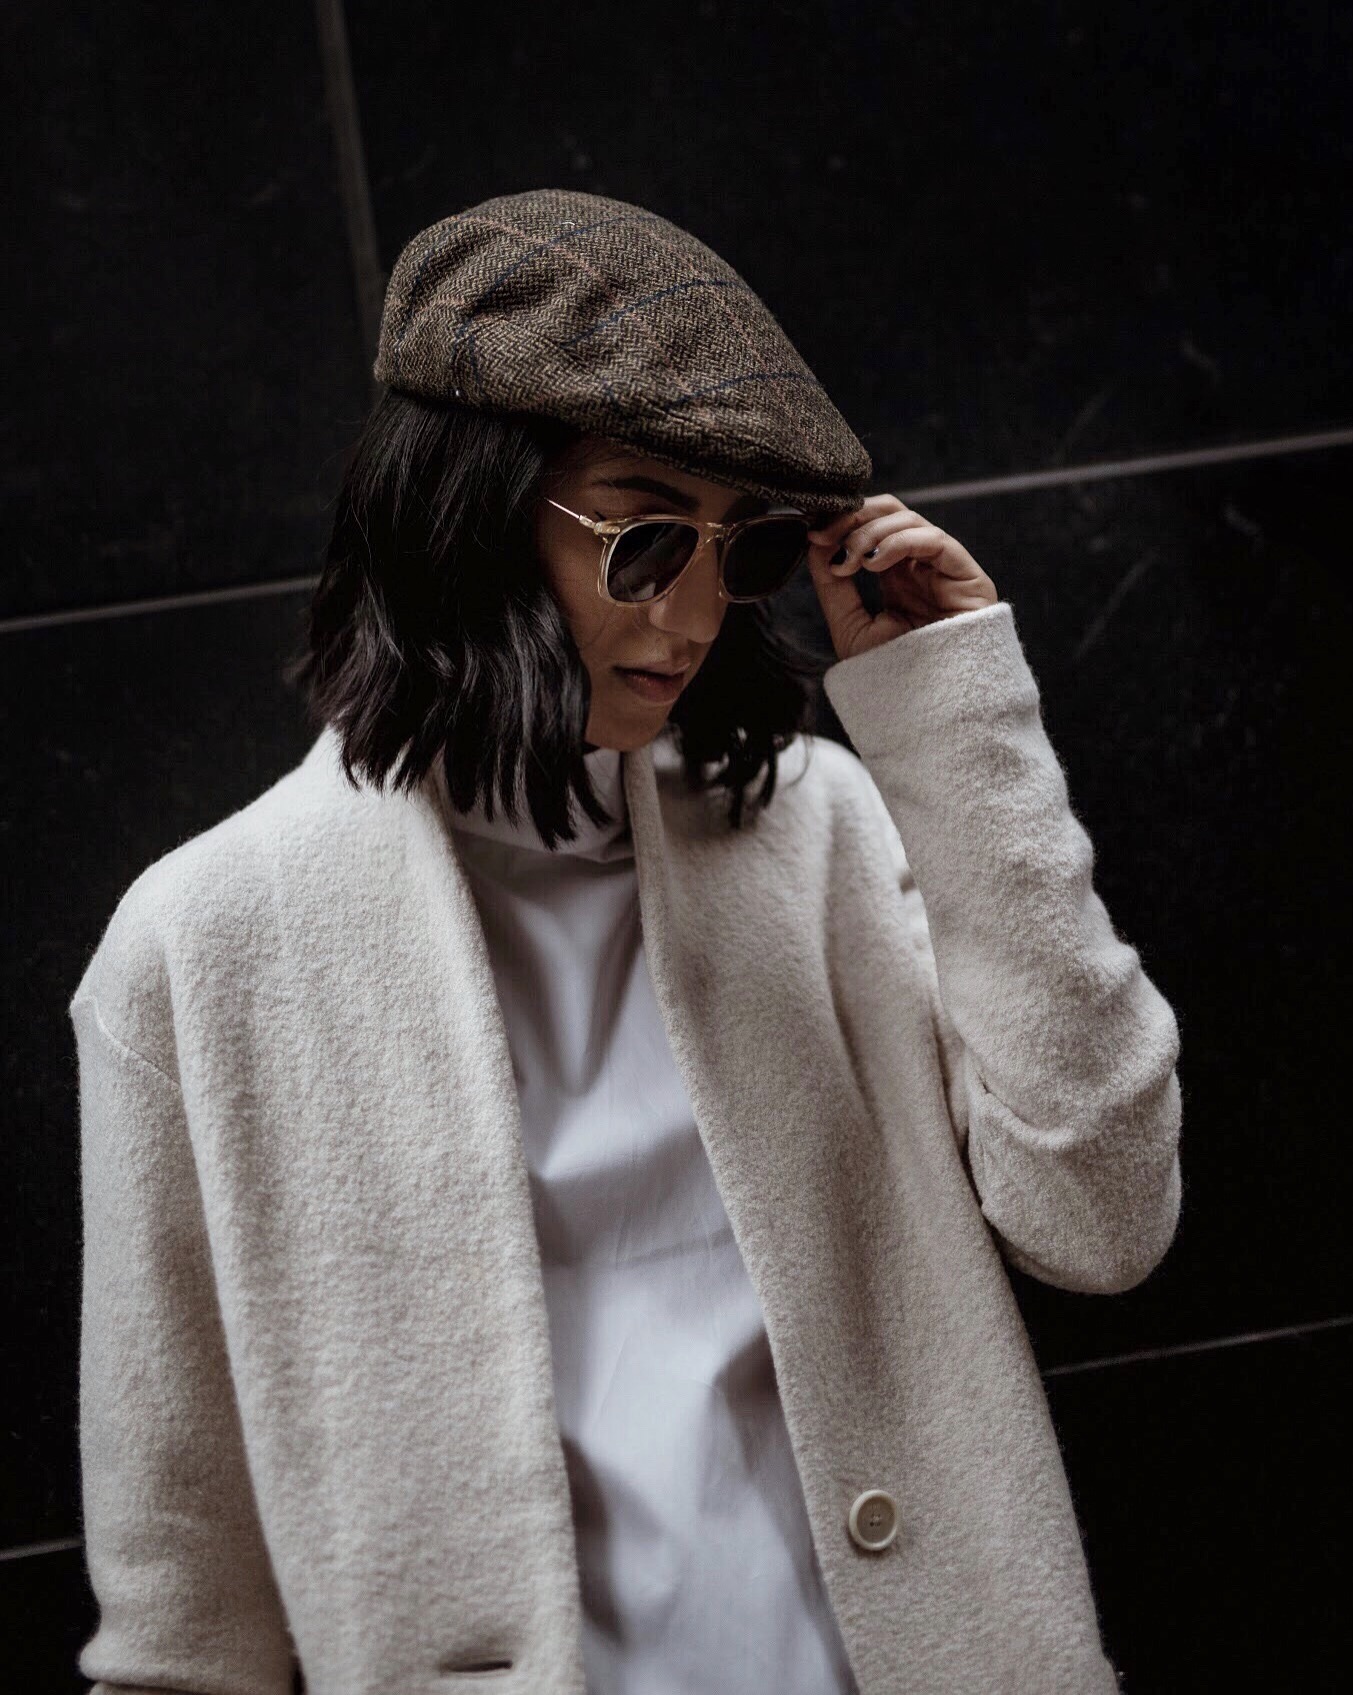 LA blogger, Tania Sarin wearing aritzia hat with wavy hair talking about hair products